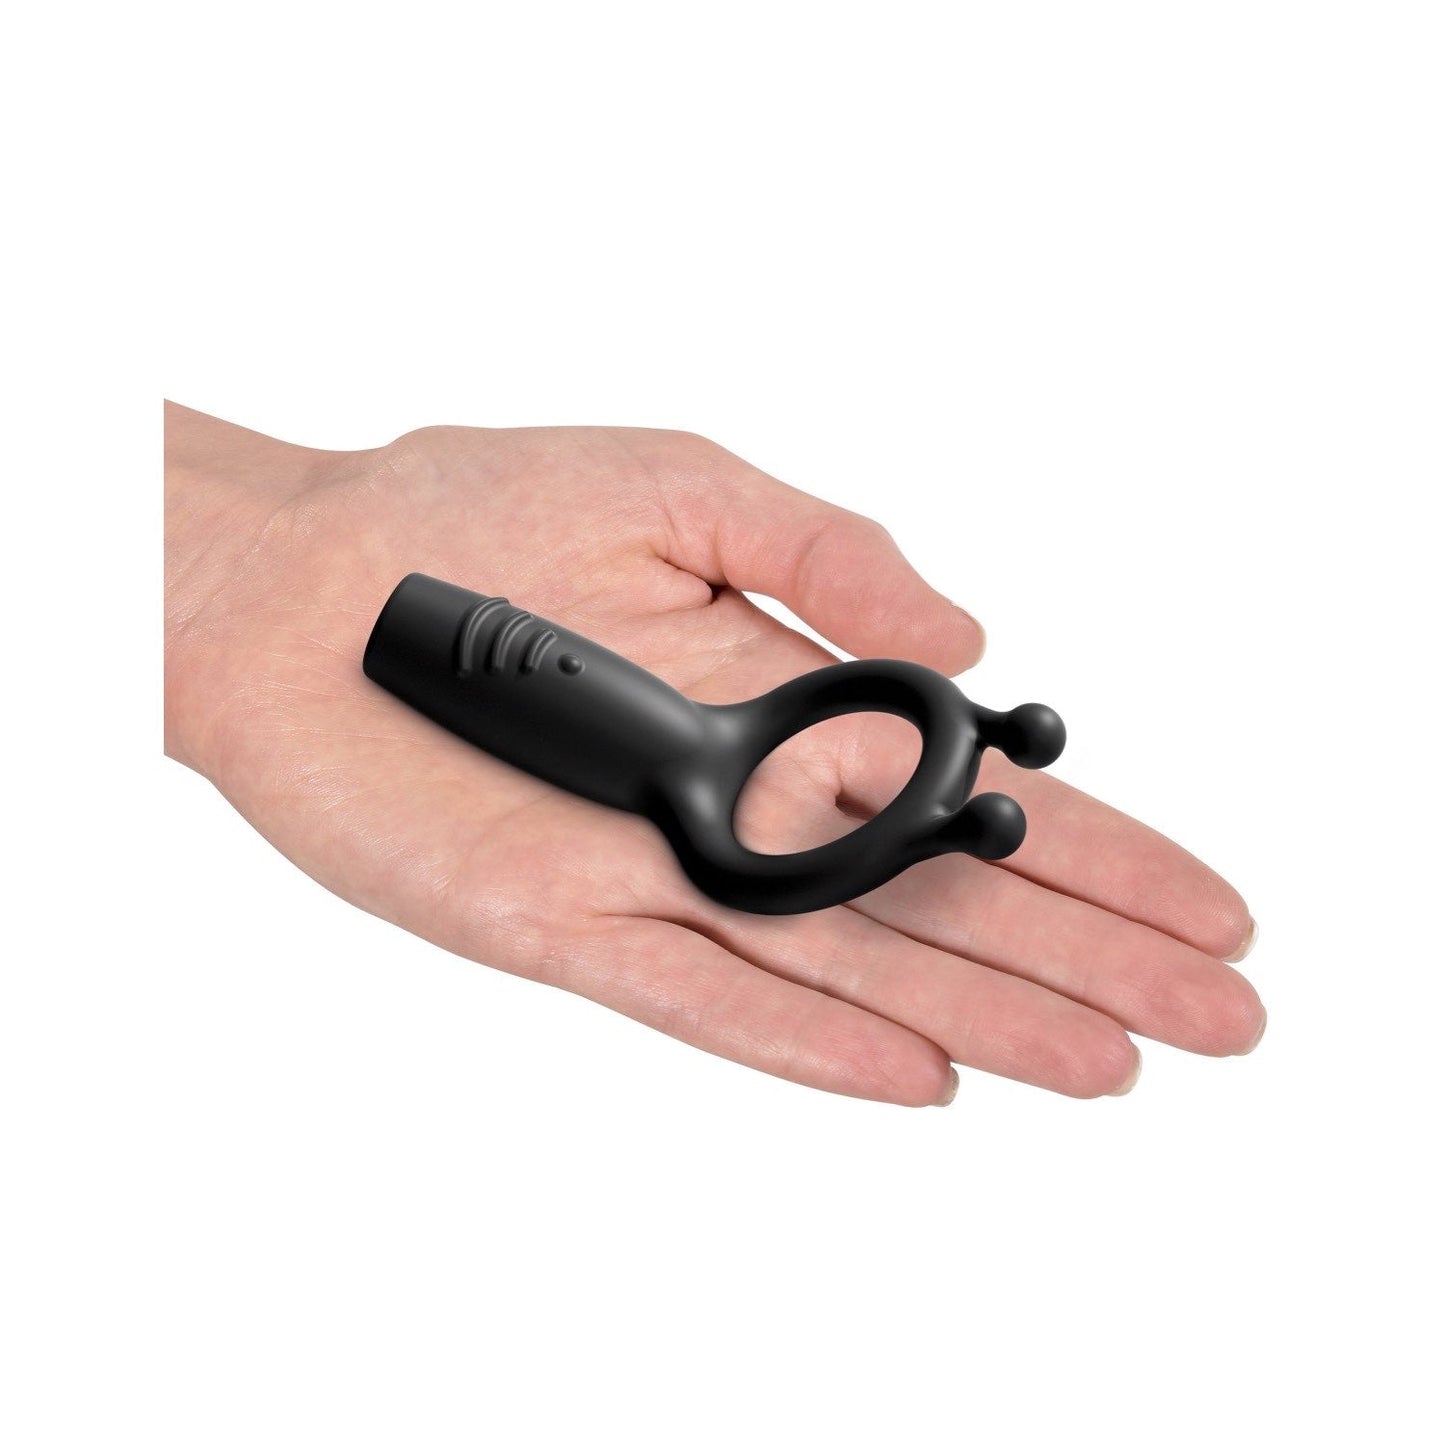 Vibrating Silicone Super C-Ring - Grey USB Rechargeable Vibrating Cock Ring